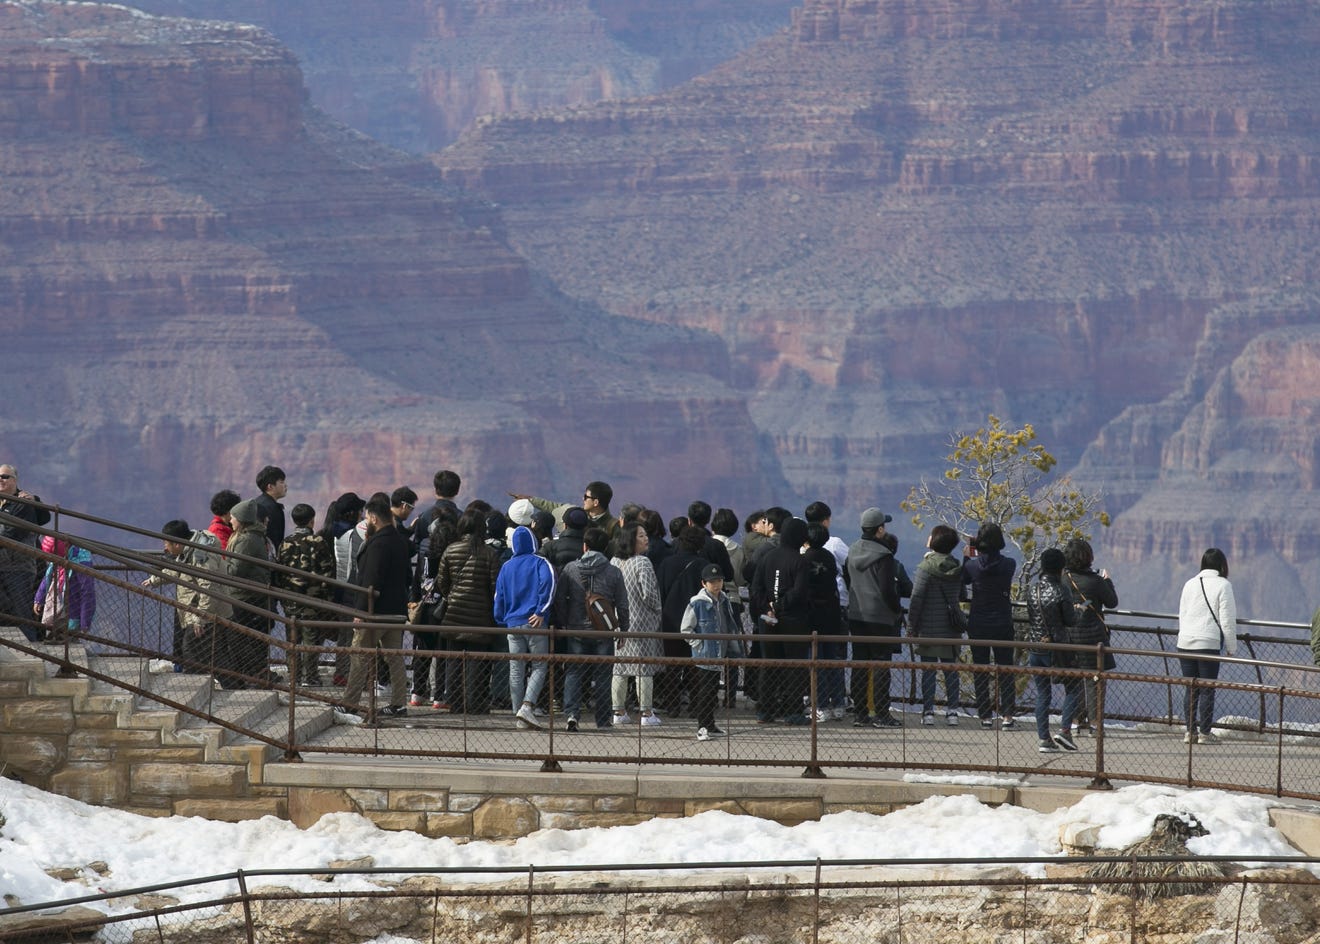 Grand Canyon tourists deaths happen because it's beautiful, dangerous